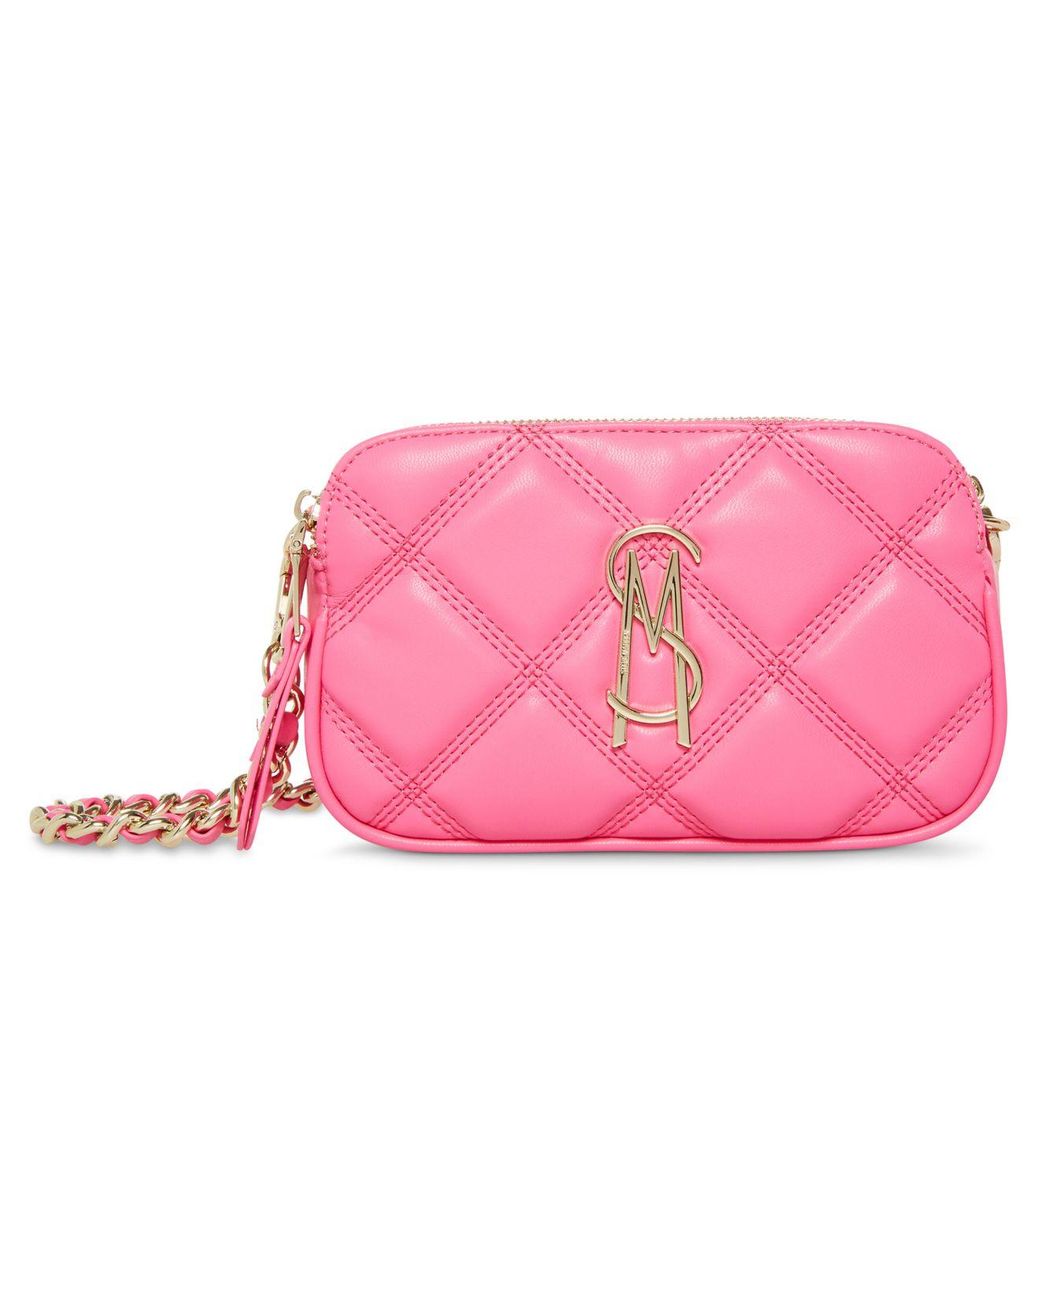 Steve Madden Bdaisy Quilted Crossbody Bag in Pink | Lyst